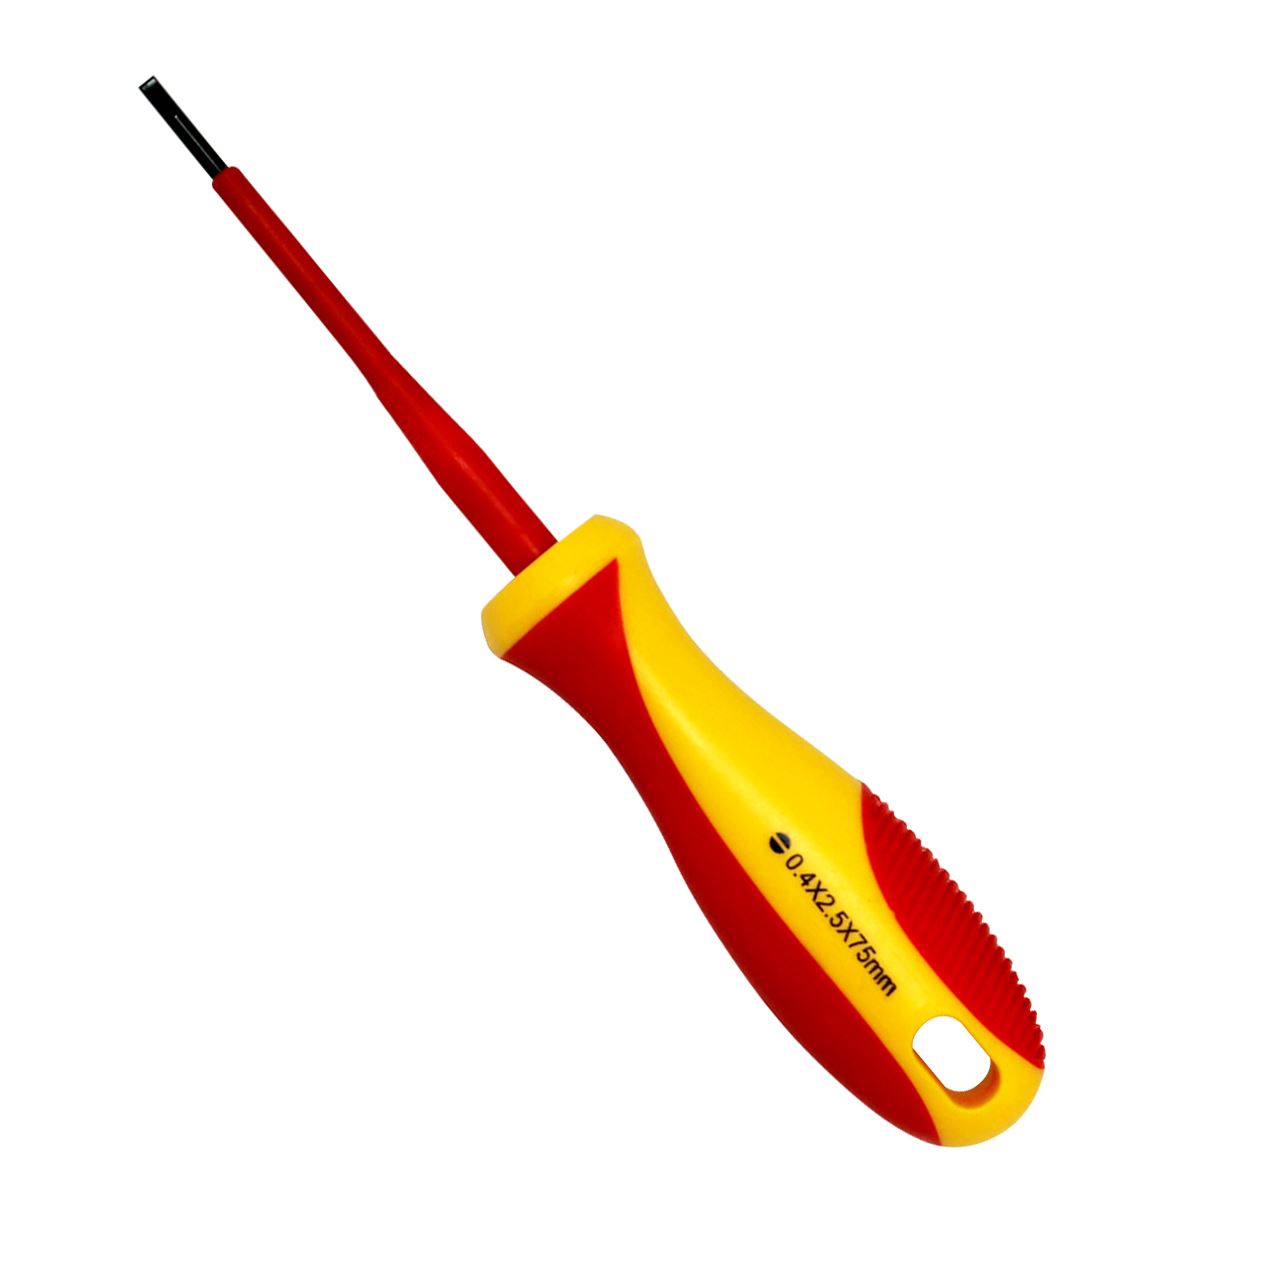 GOLDTOOL_75mm_Electrical_Insulated_VDE_Screwdriver._Tested_to_1000_Volts_AC._(0.4*2.5*75mm)._Yellow/Red_Colour_Handle